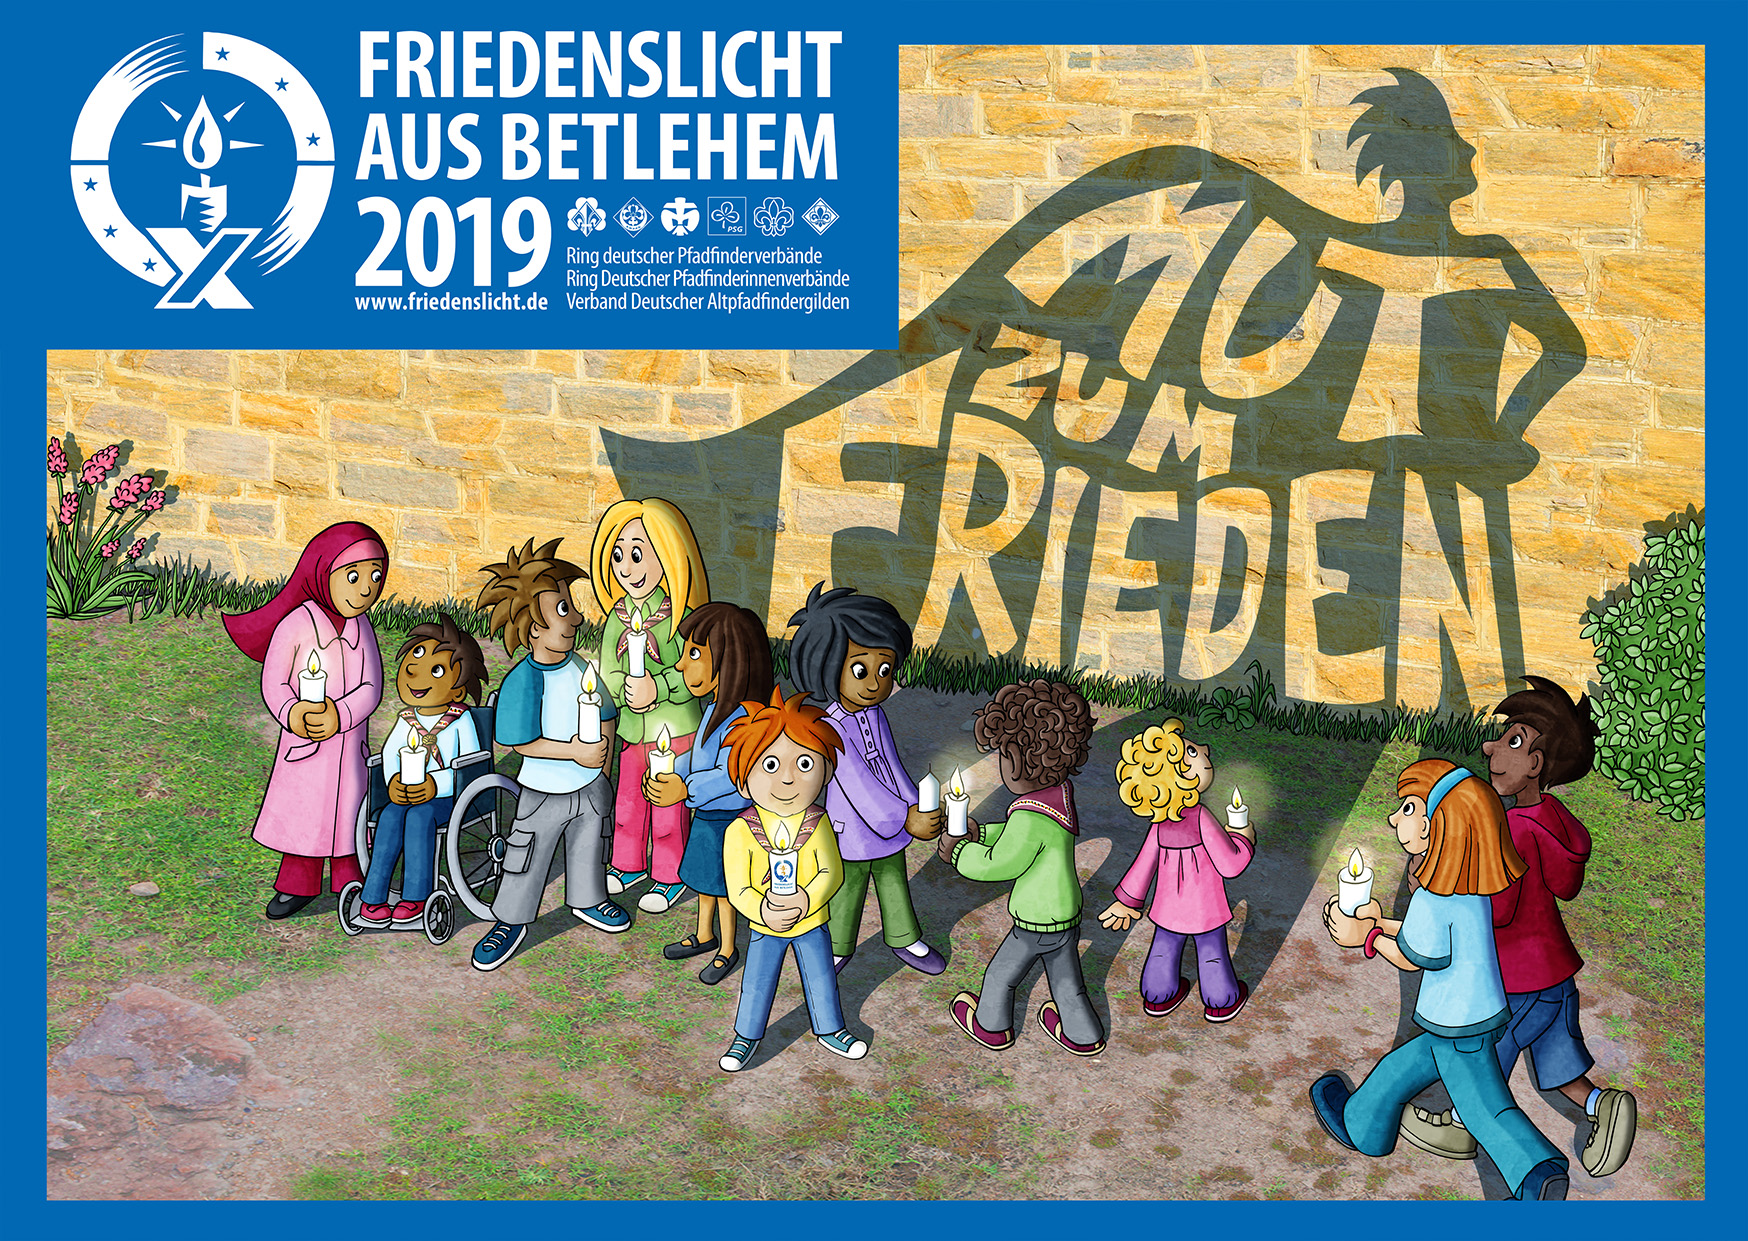 You are currently viewing Friedenslicht 2019